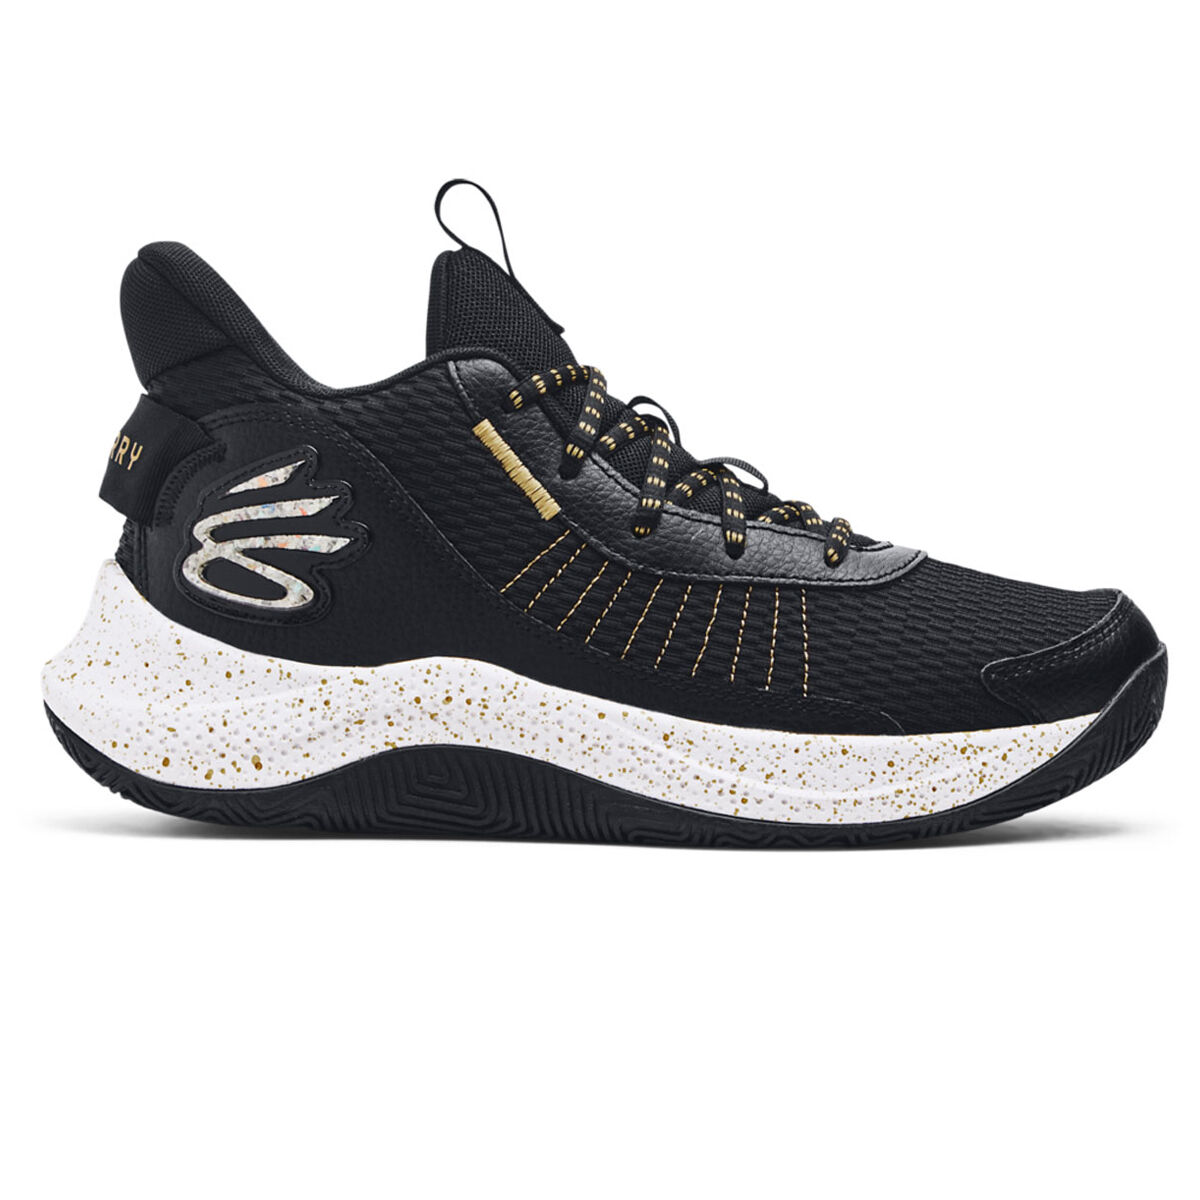 Under Armour Curry 3Z7 Basketball Shoes | Rebel Sport